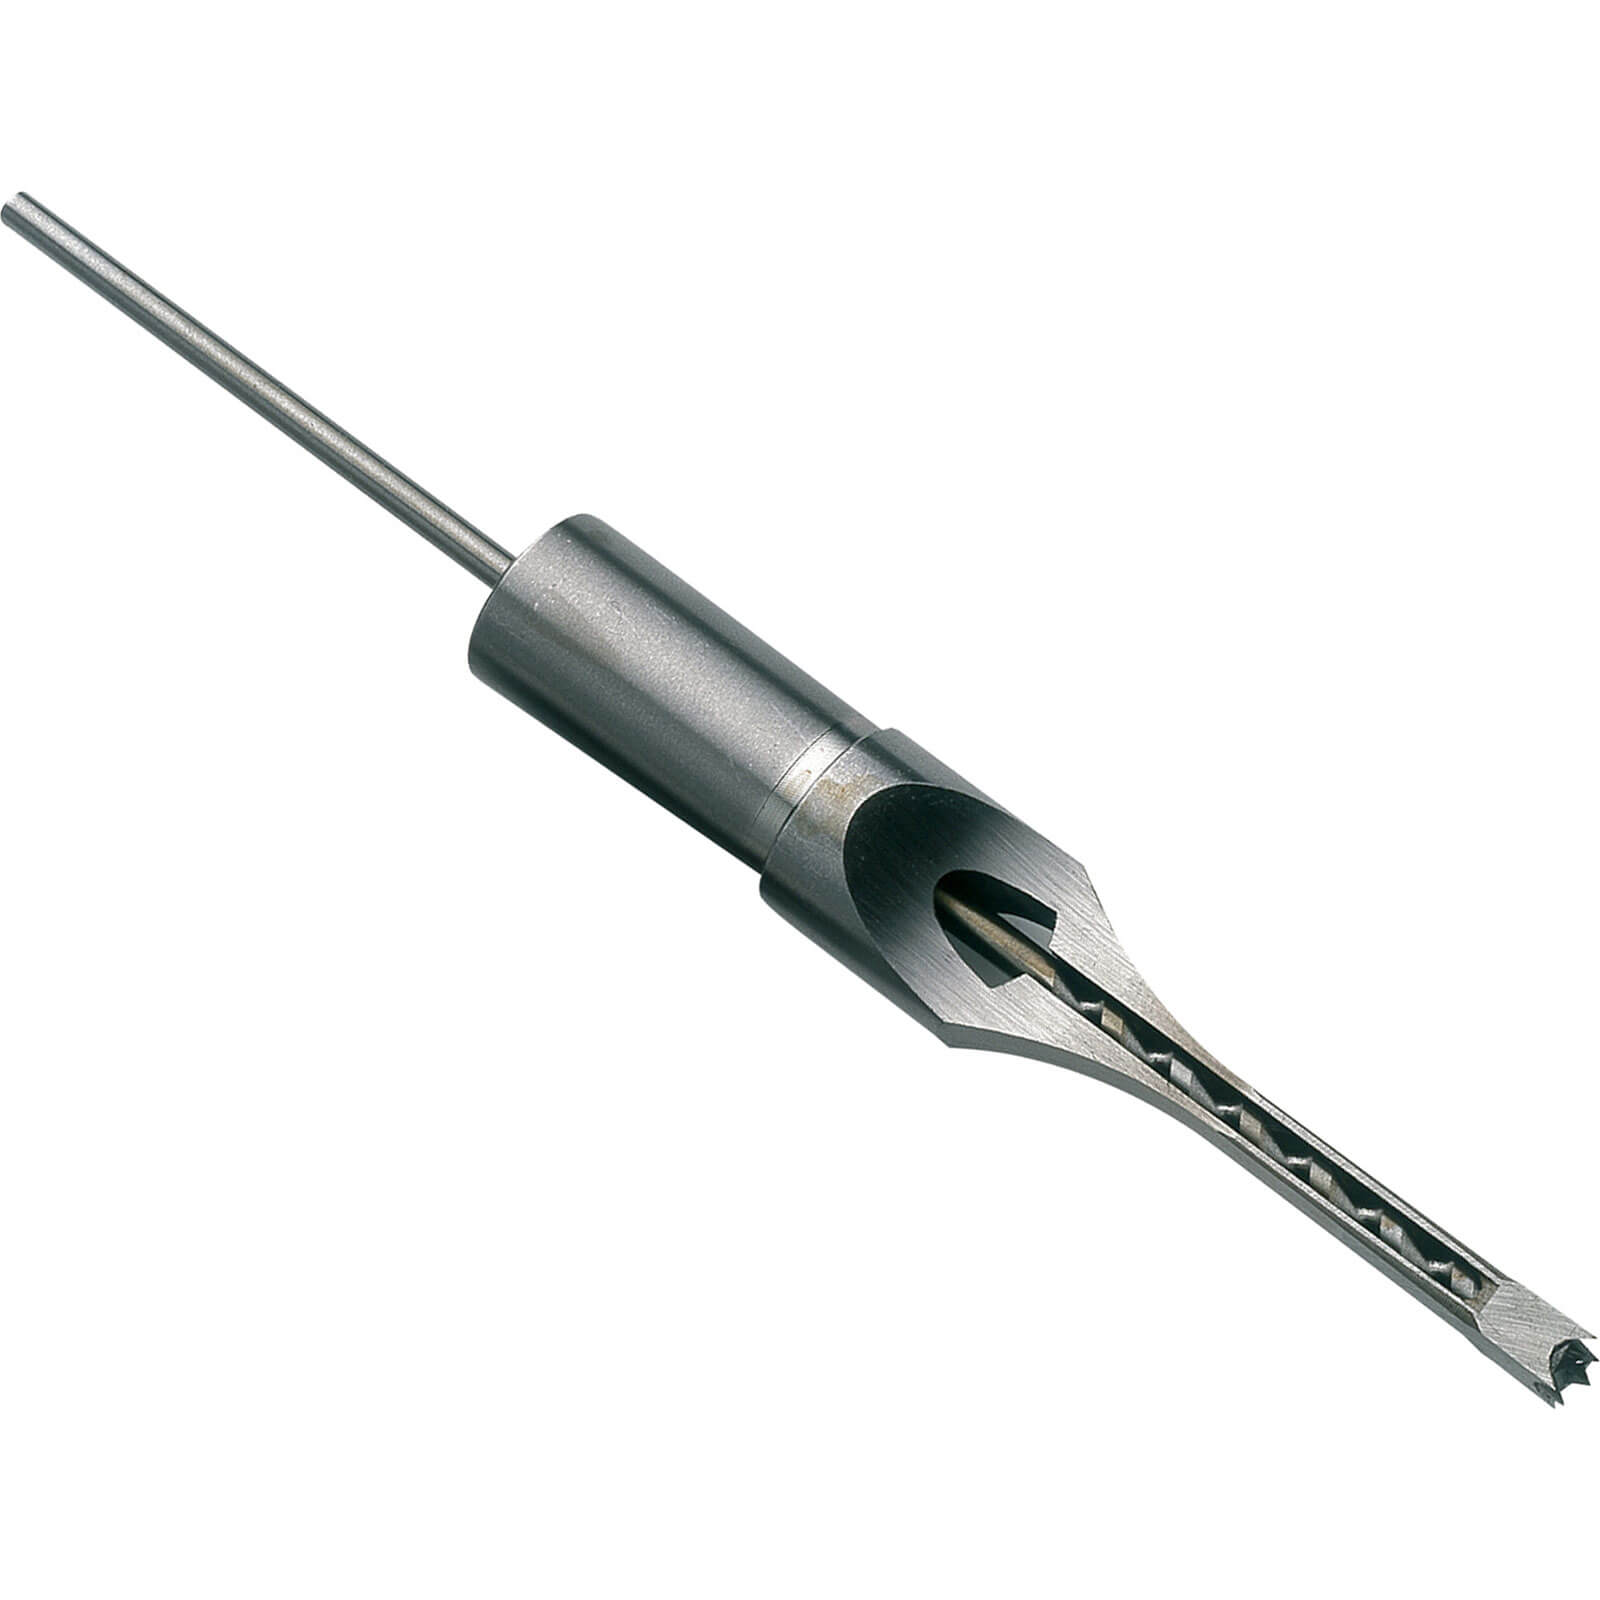 Record Power Chisel & Bit 3/8" For RPM75